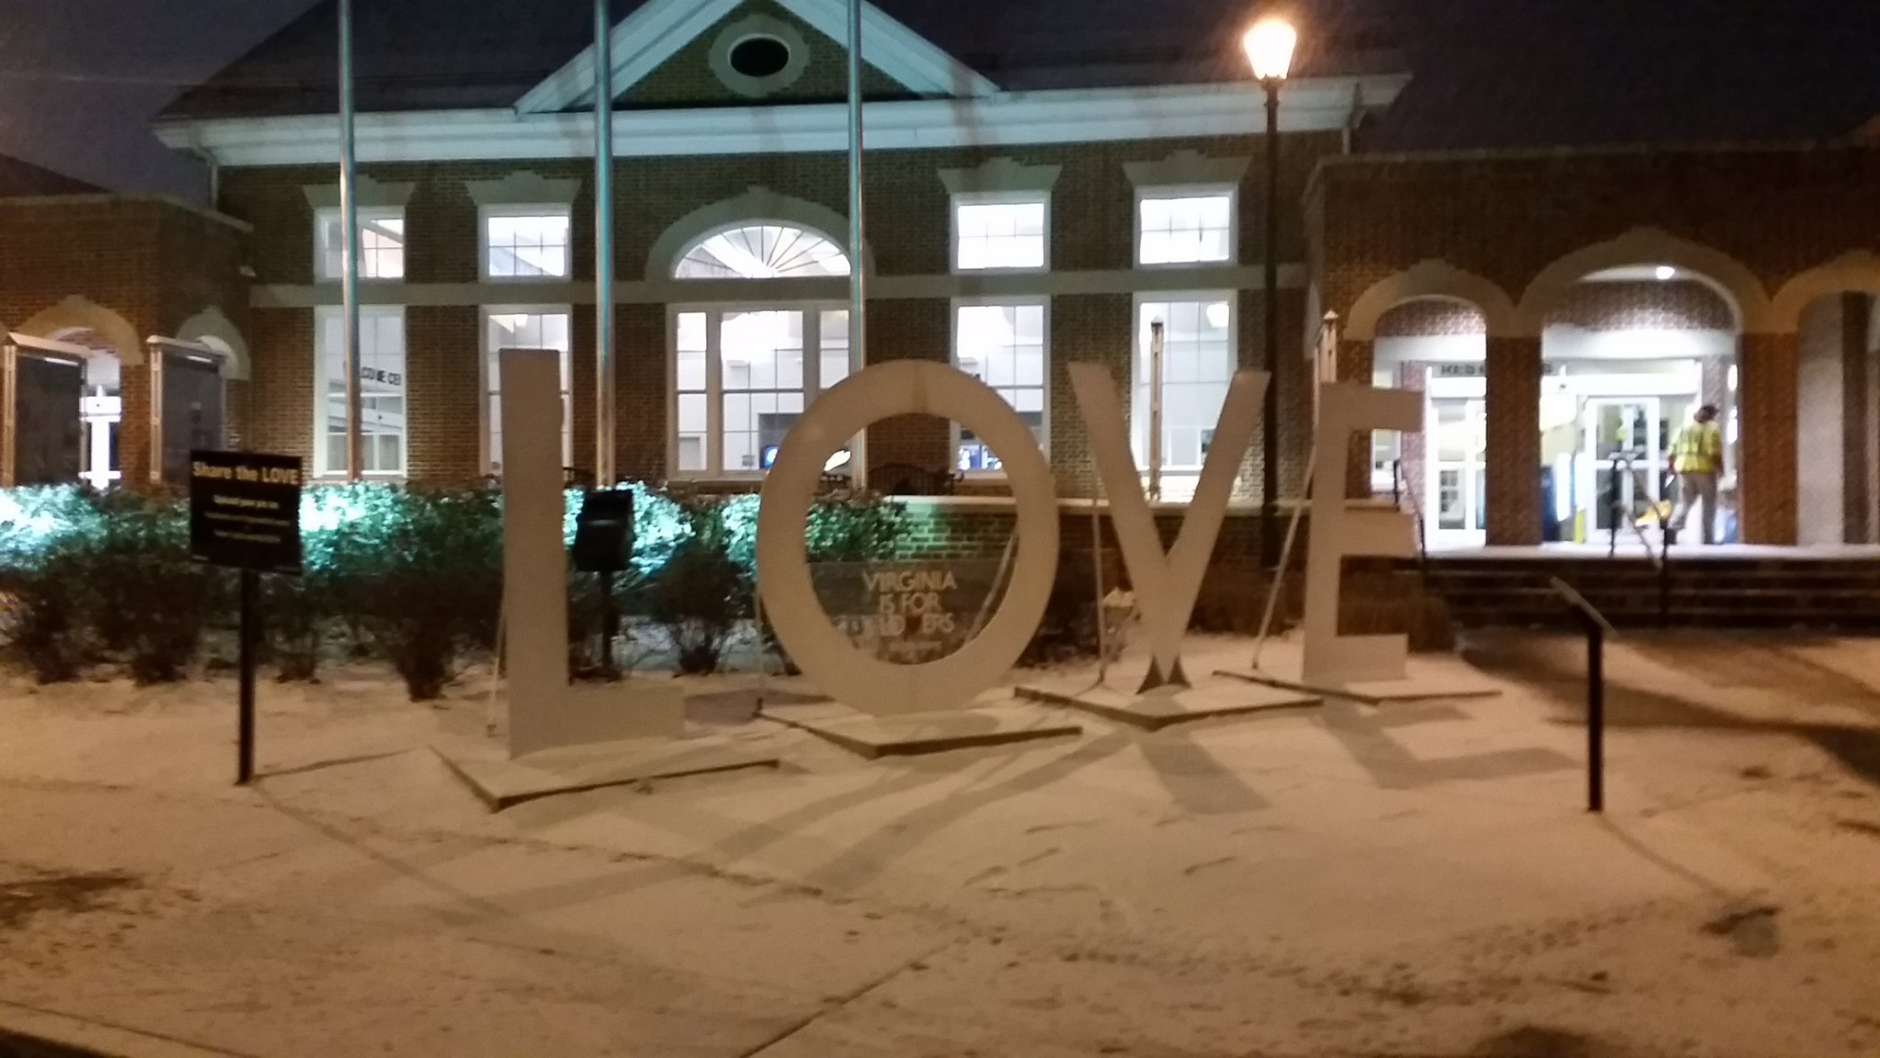 At a rest stop on Interstate 95 in Fredericksburg, Va., on Saturday morning, WTOP Reporter Kathy Stewart tweeted that "folks may not be loving that forecasters predict up to a foot of snow in Southeastern VA." (WTOP/Kathy Stewart)